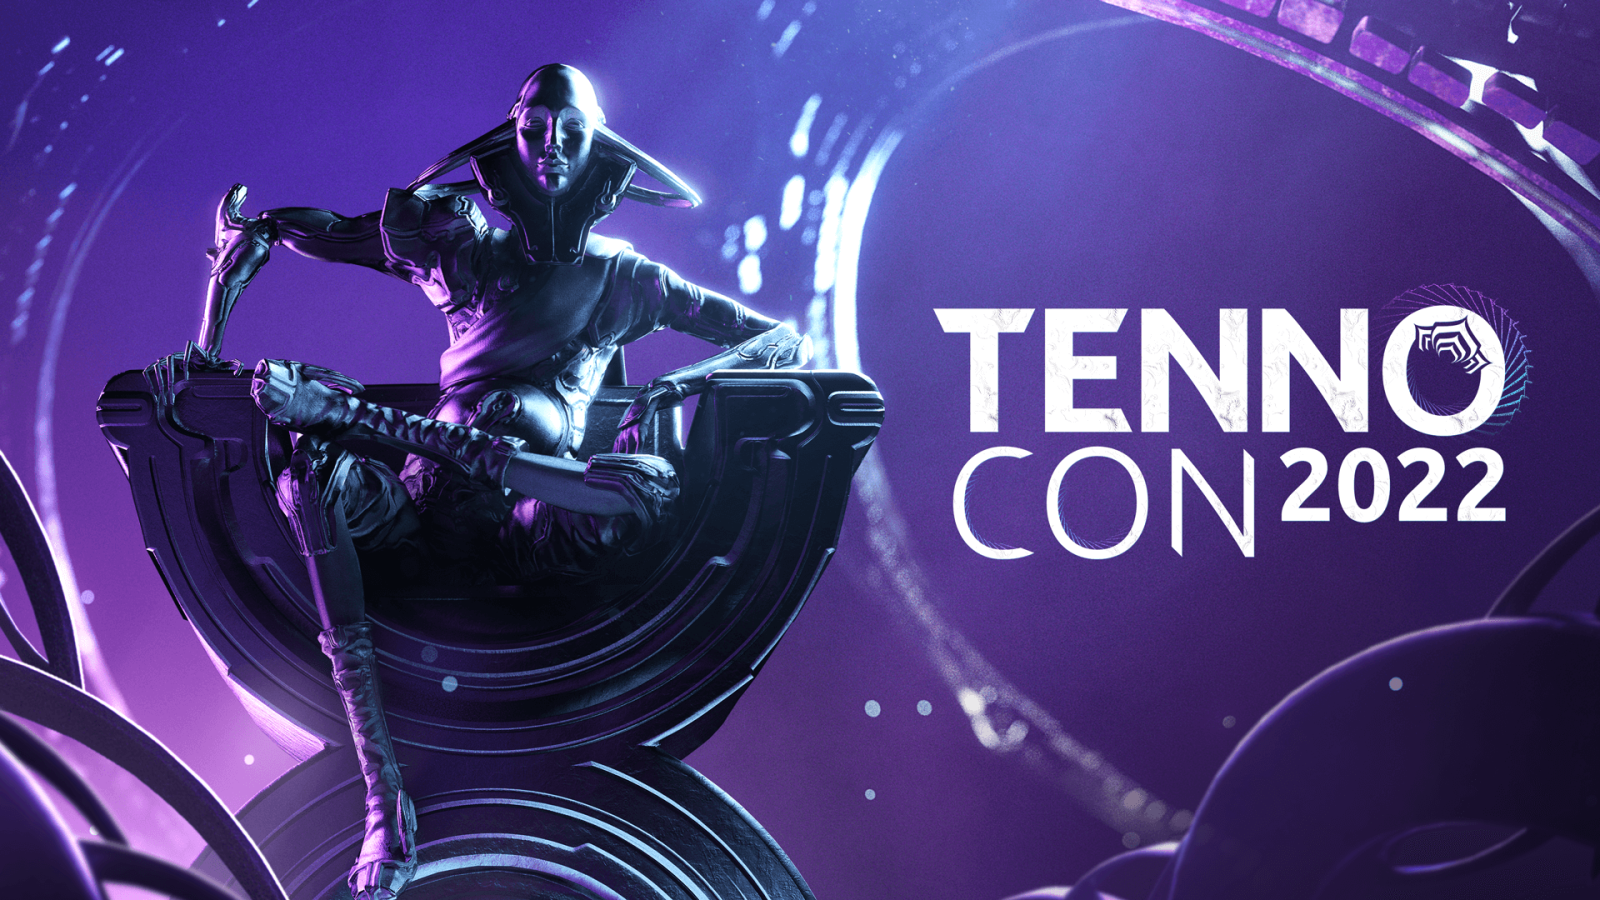 How to make the most of TennoCon 2022